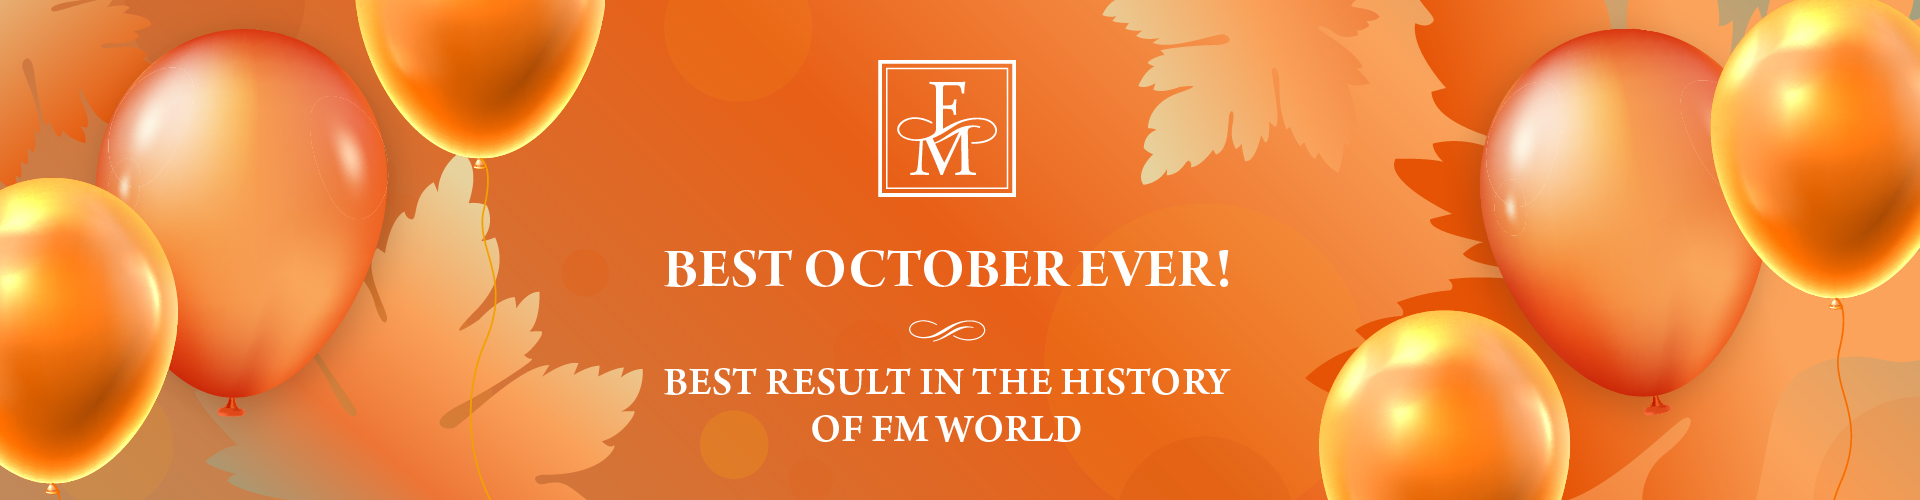 FM WORLD WITH ANOTHER RECORD